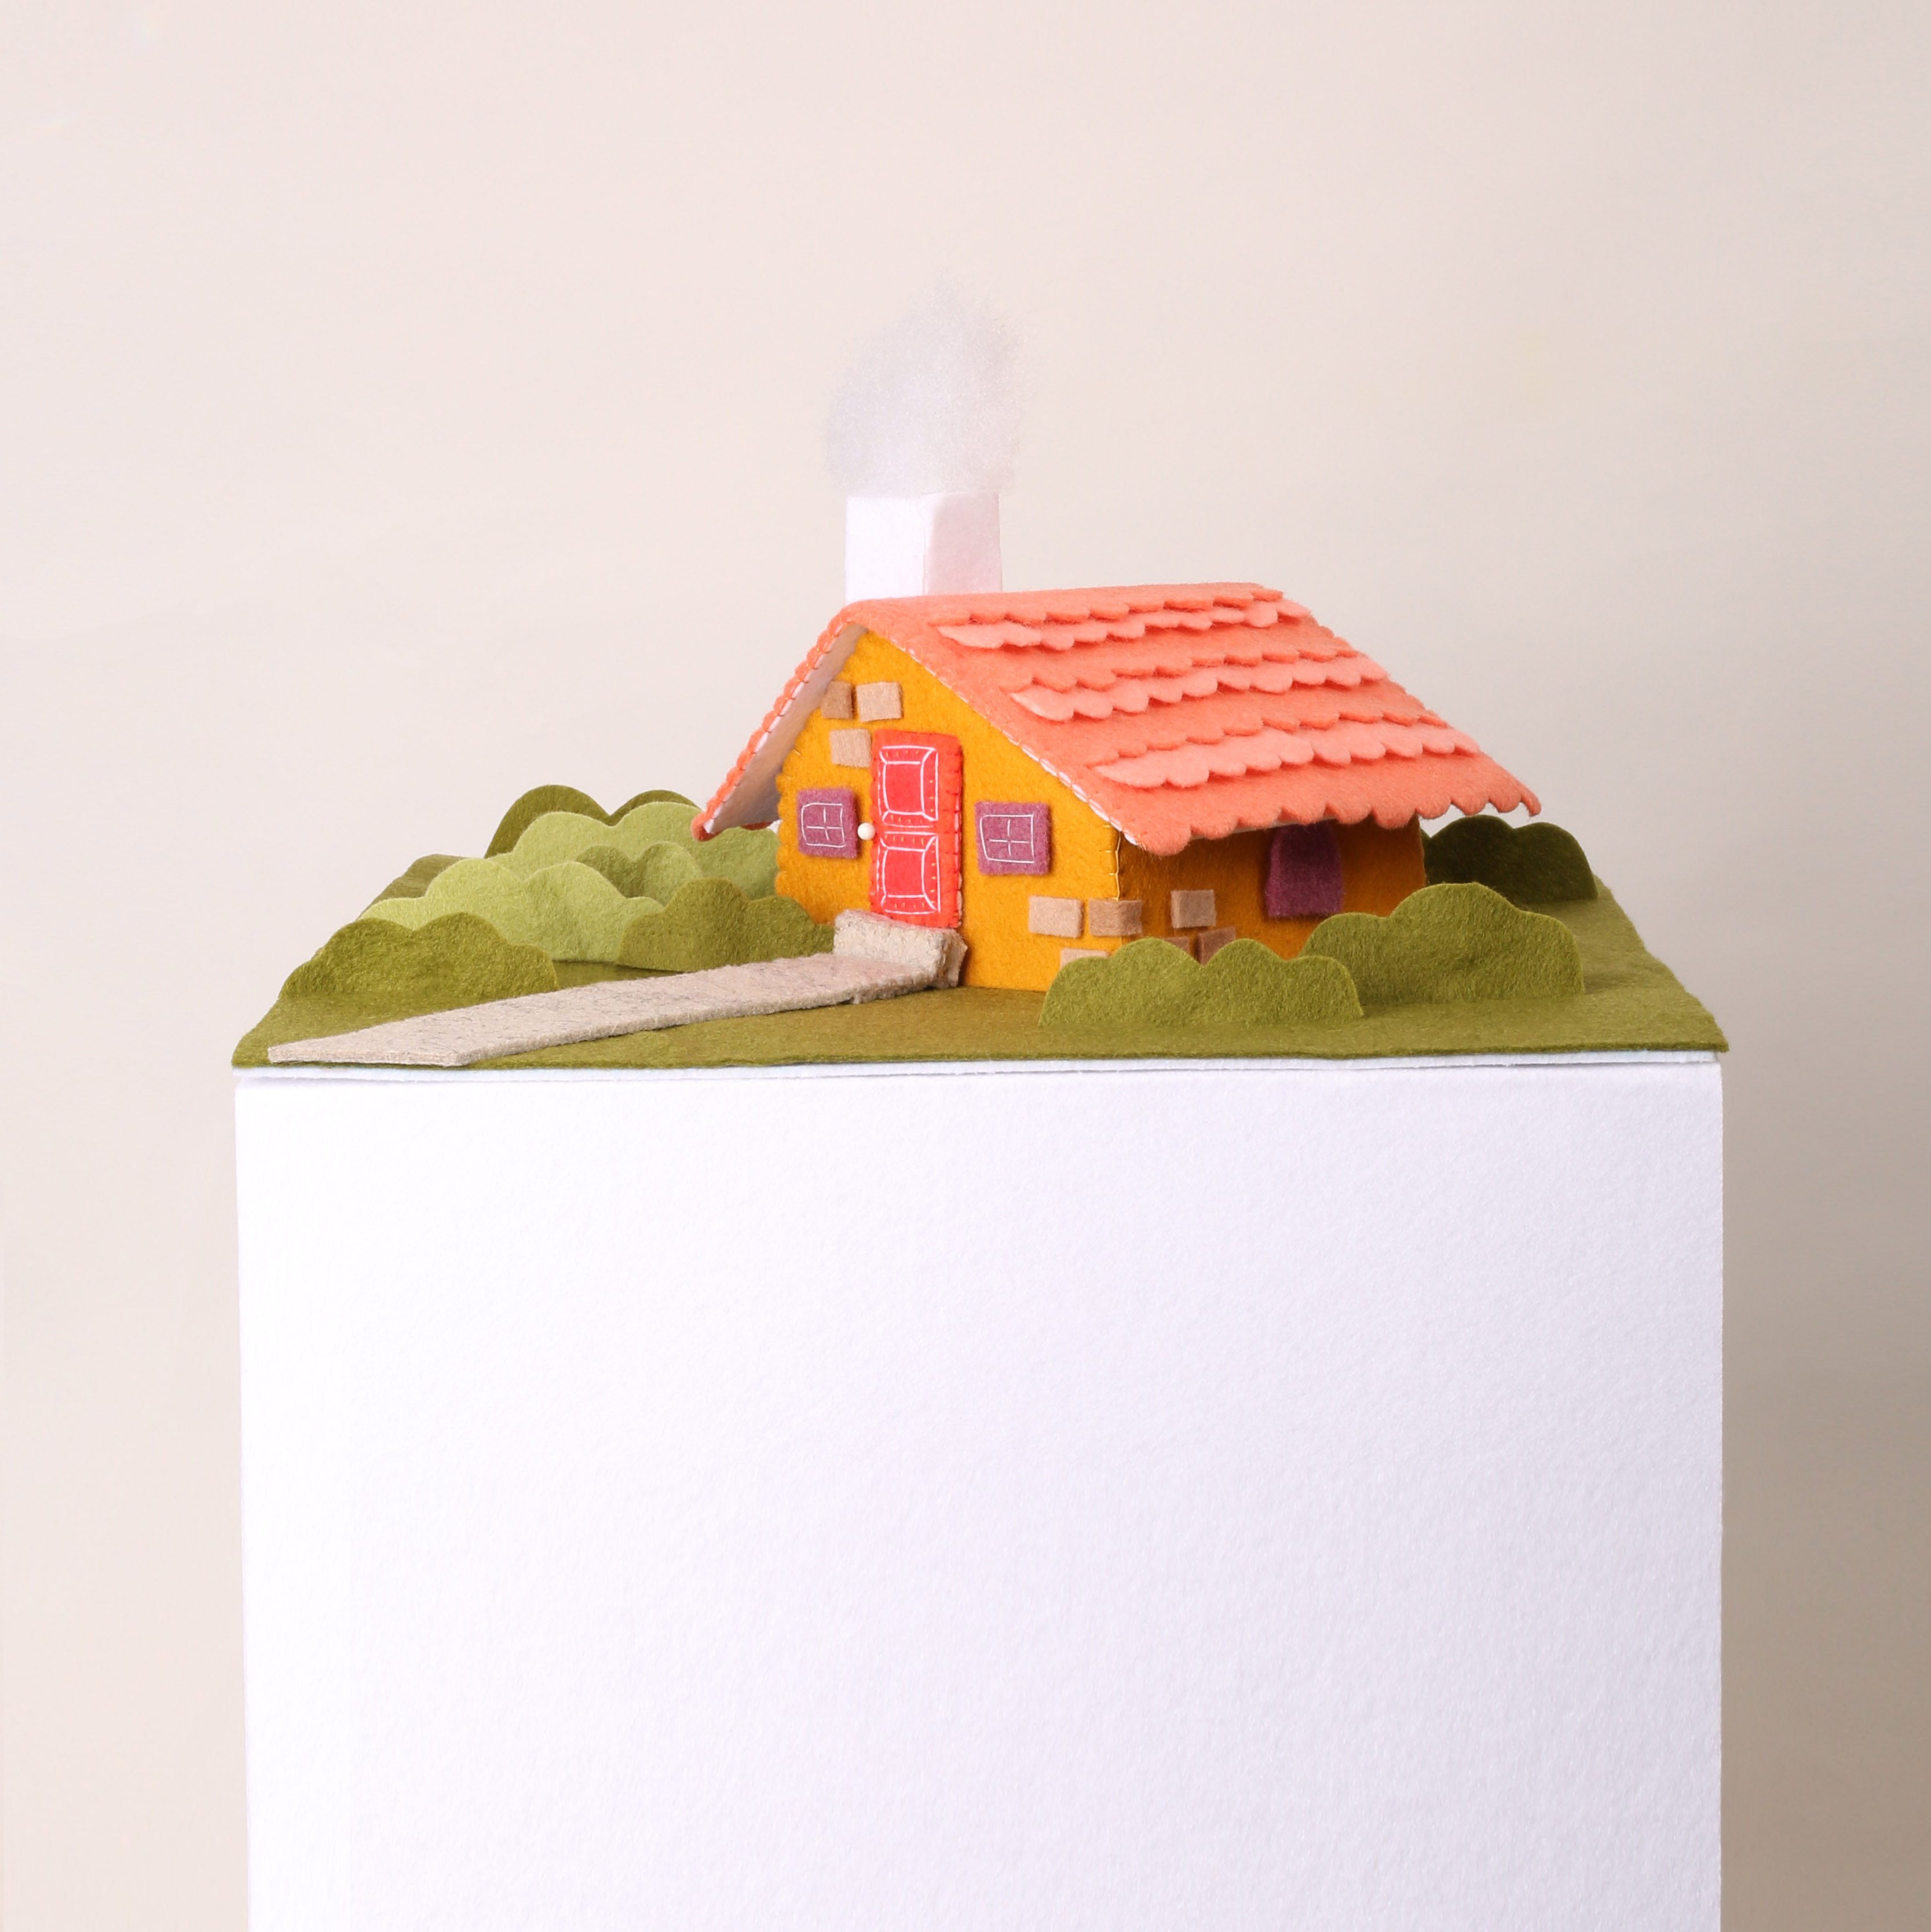 Tiny little felt house, with yellow walls and a red shingled roof, and a little puff of white smoke coming out of the chimney. A green grassy yard on little lumpy felt bushes. The house and garden is on a tall white plinth like it might be in a gallery.